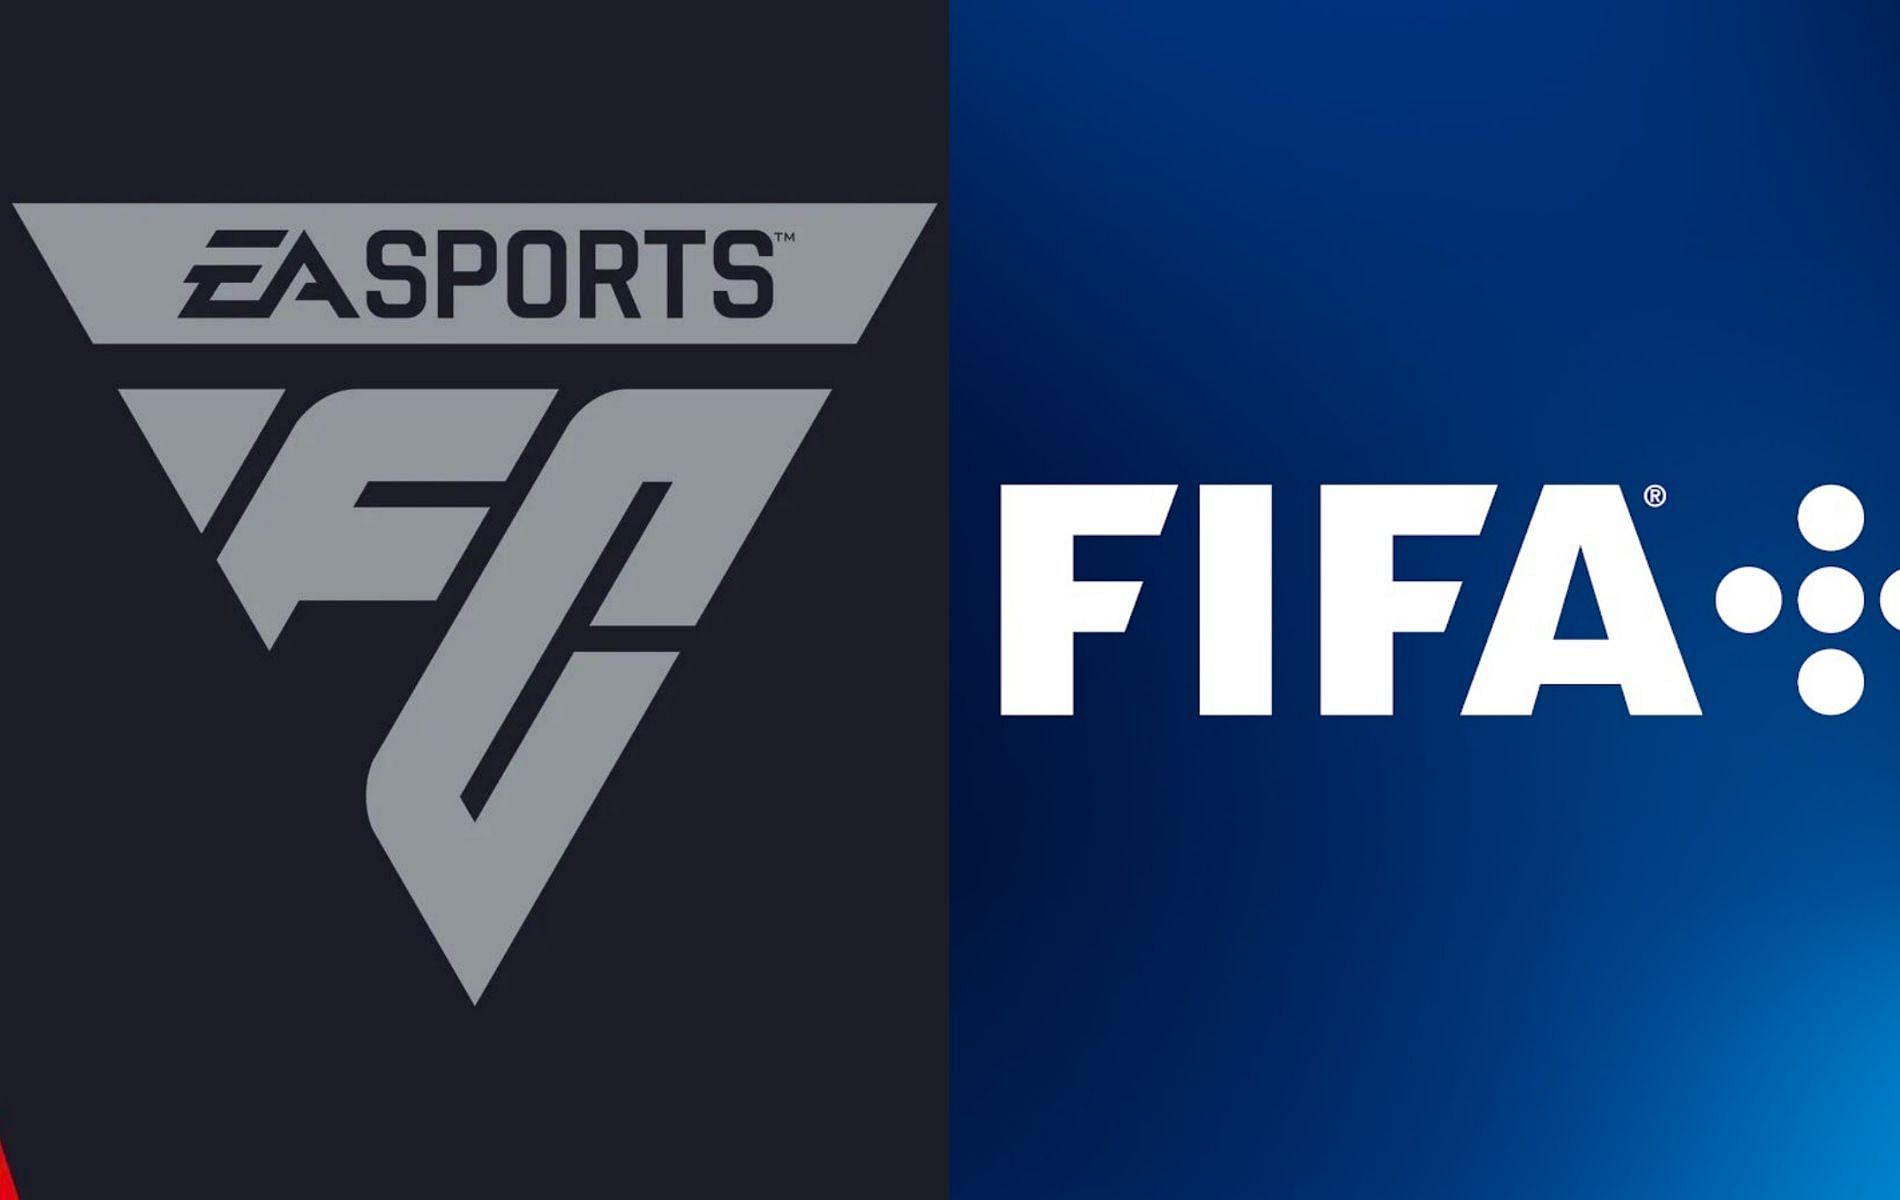 EA Sports FC might get an earlier release than FIFA (Images via EA and FIFA)